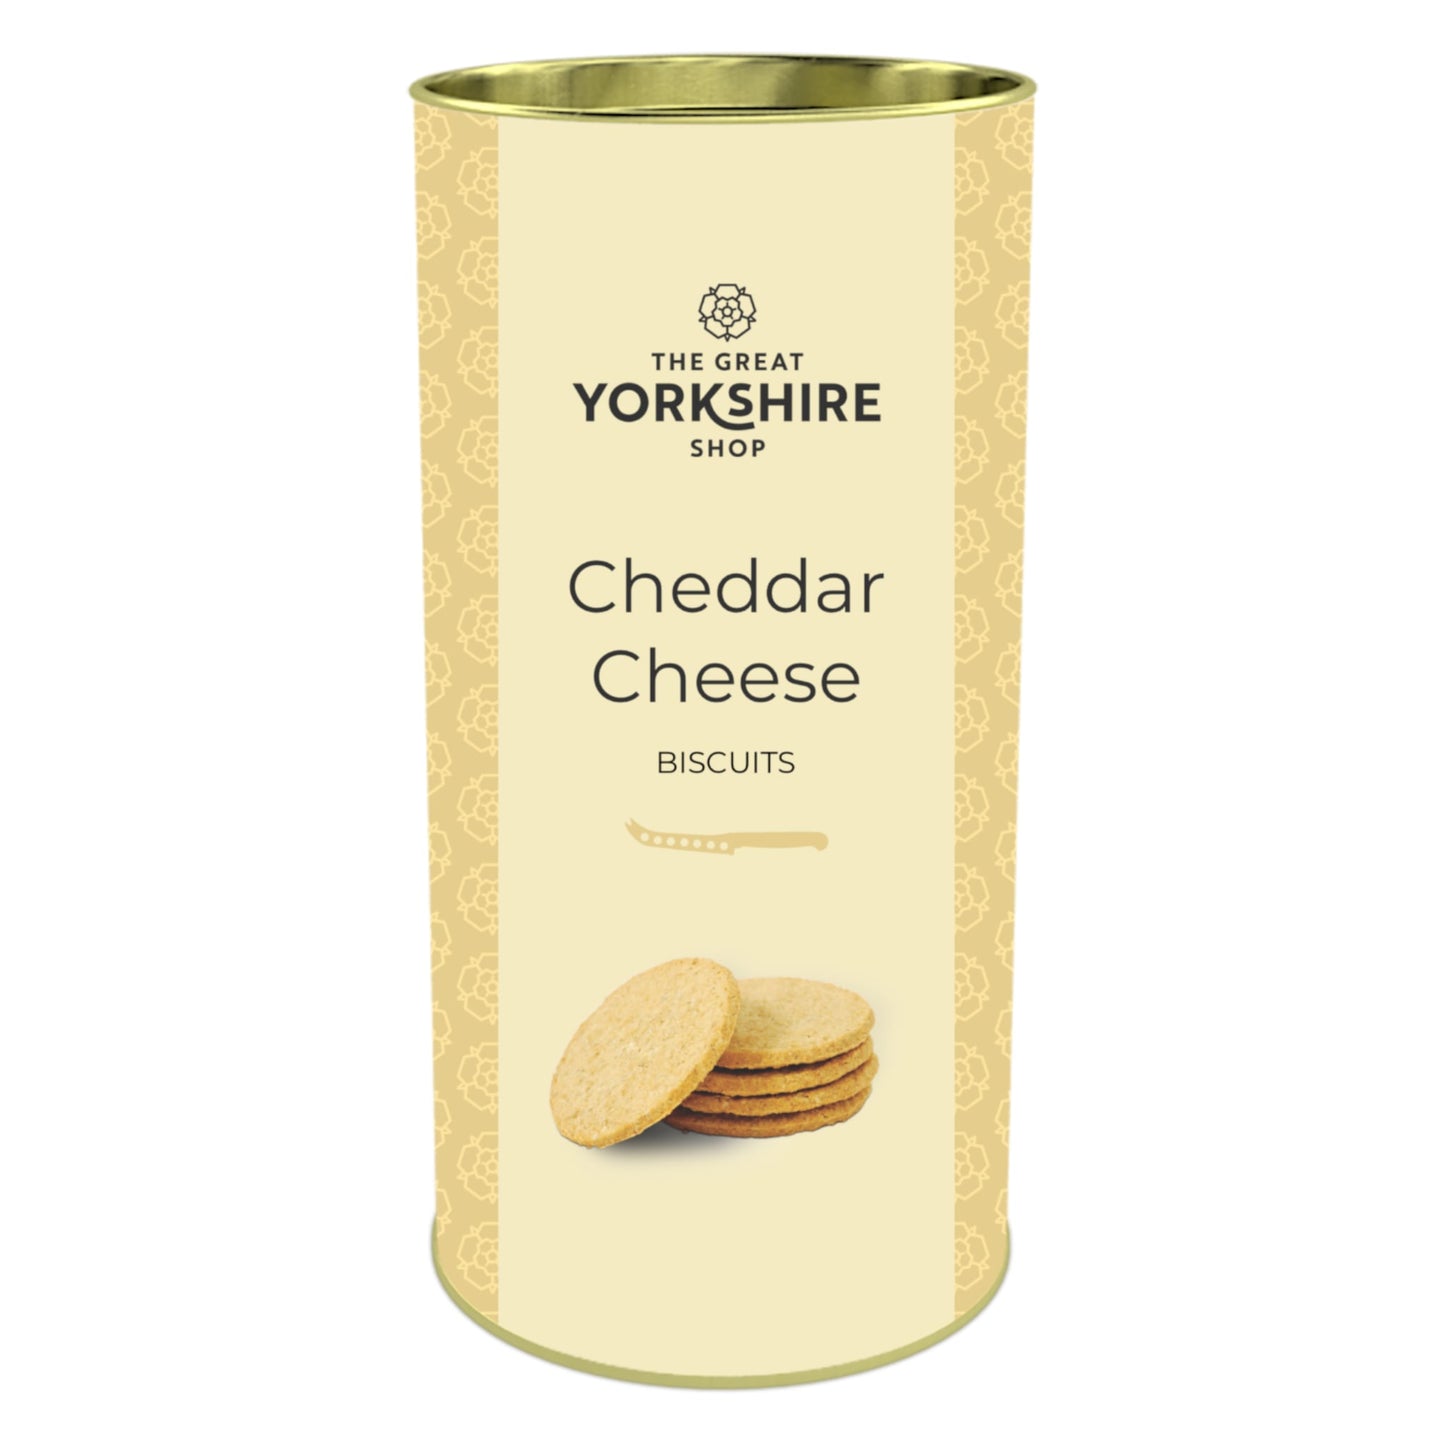 Cheddar Cheese Biscuits - The Great Yorkshire Shop